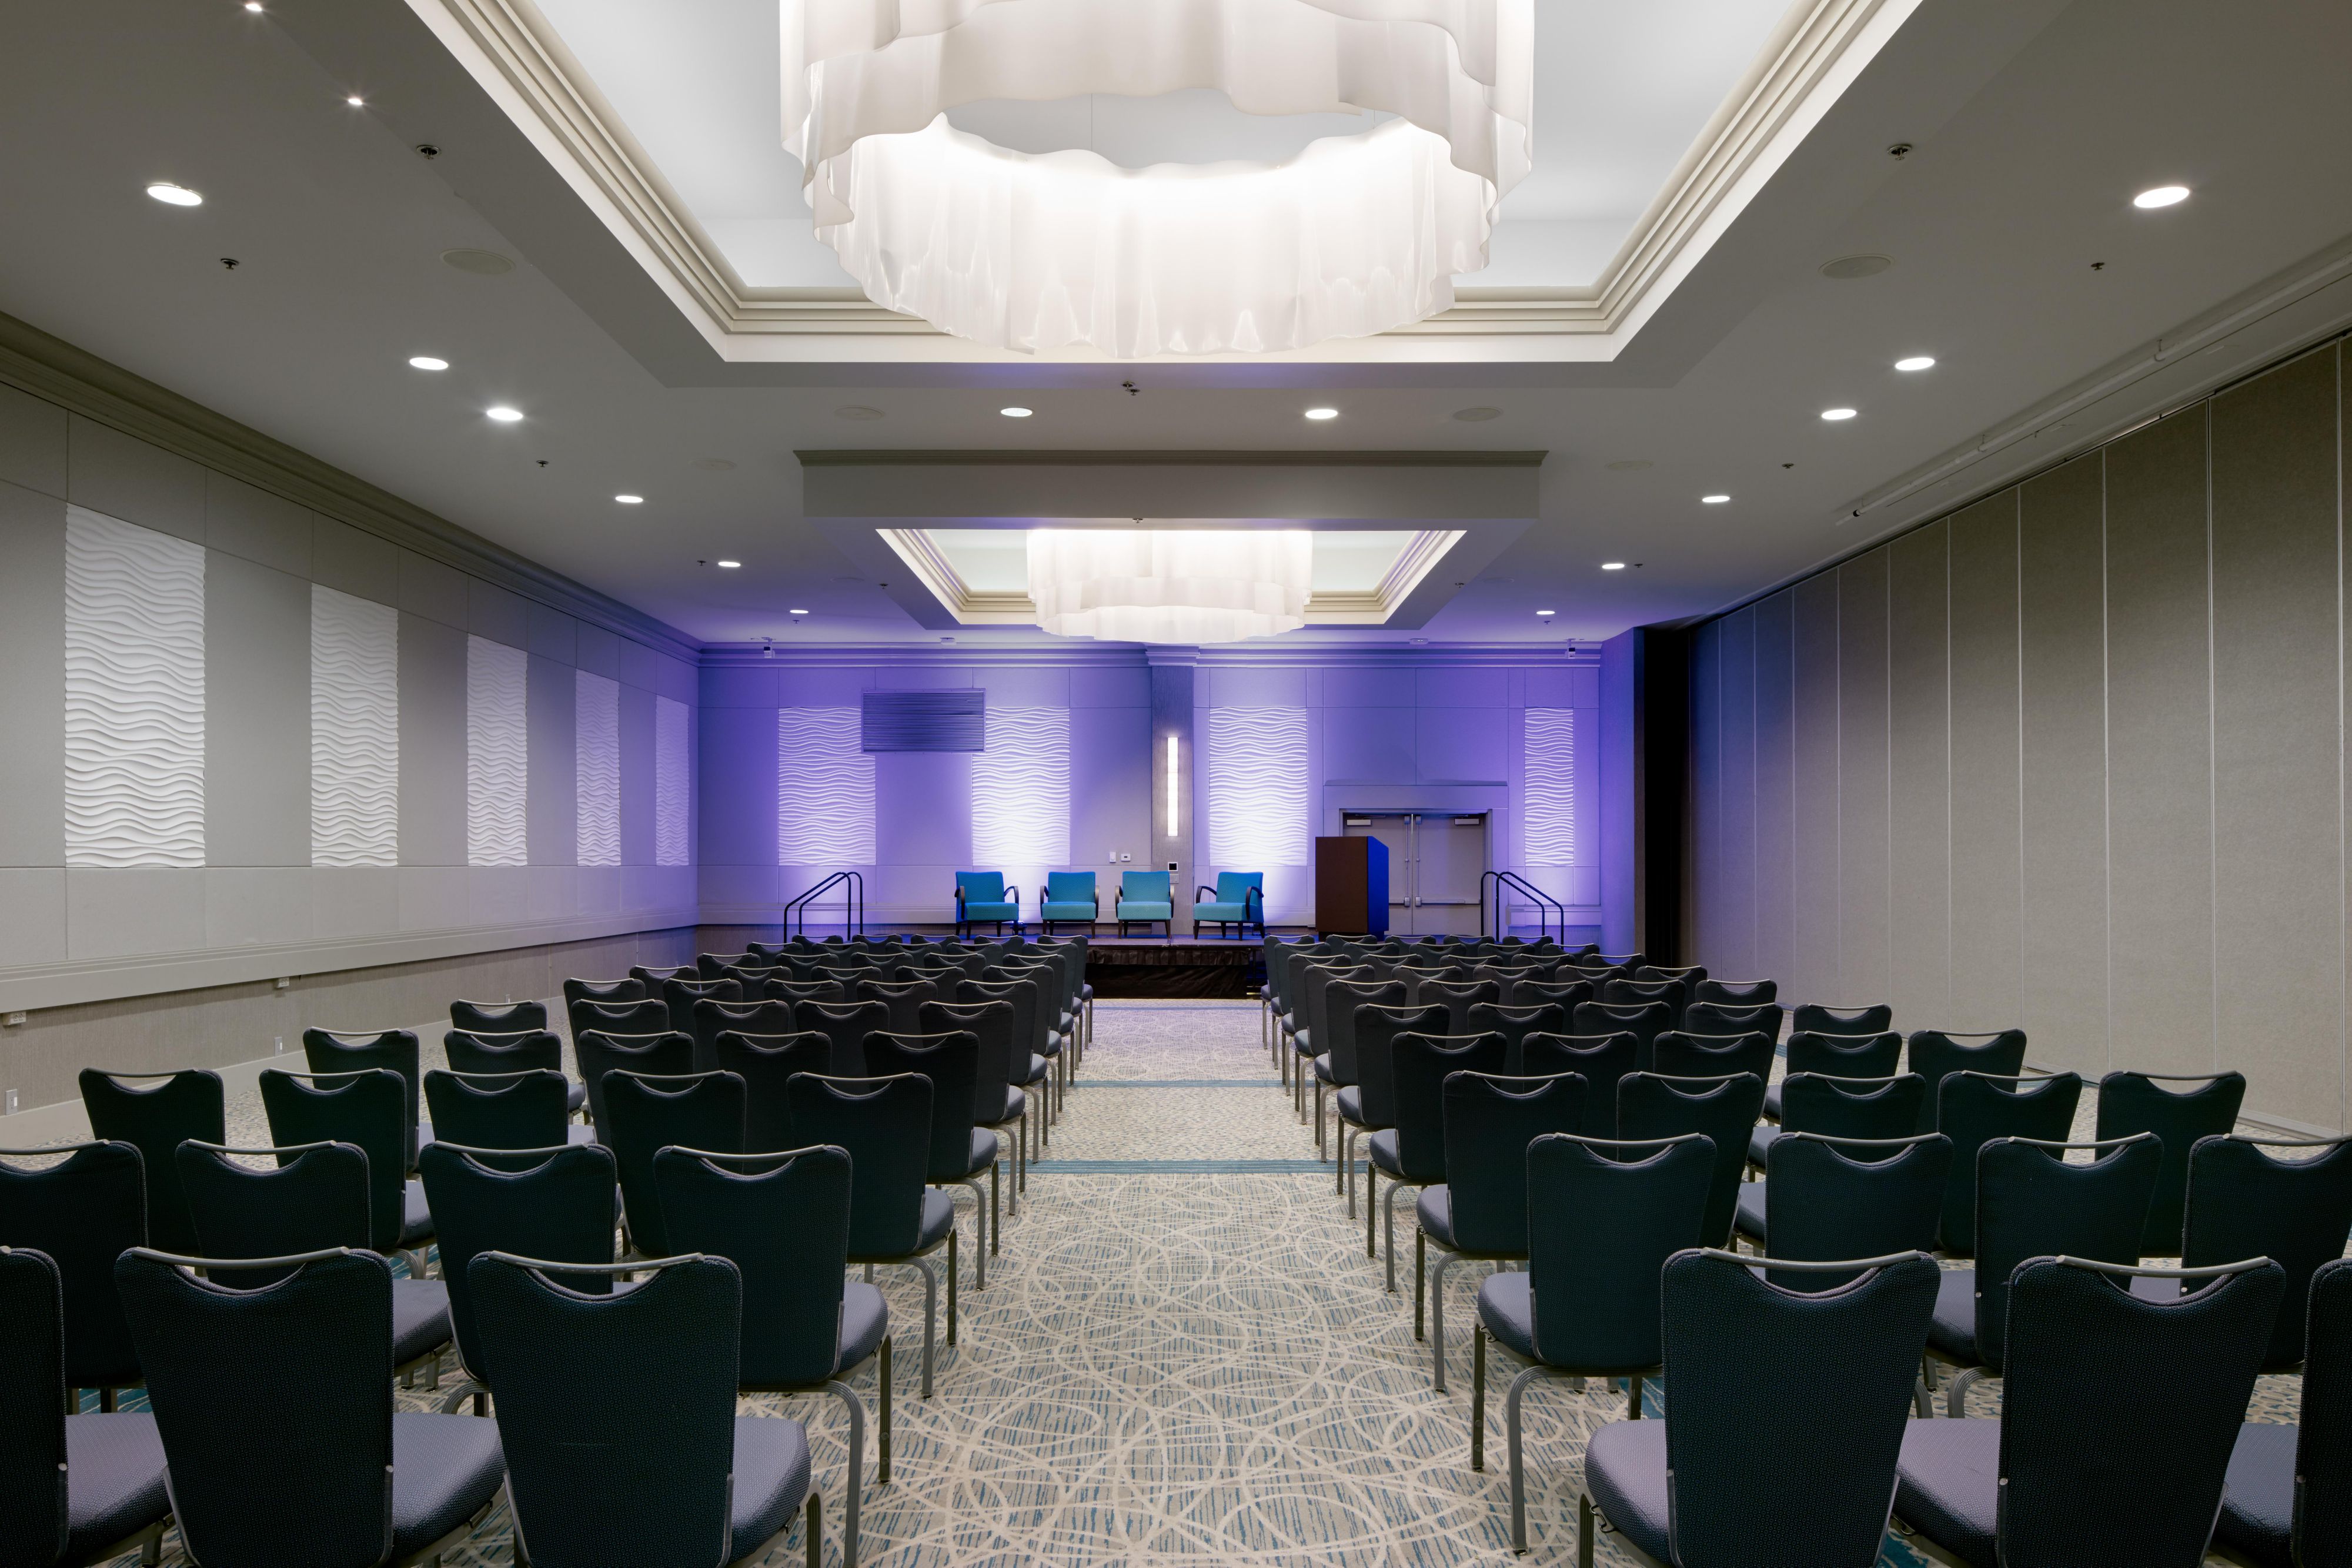 Plan your next seminar with the most flexible event space in town